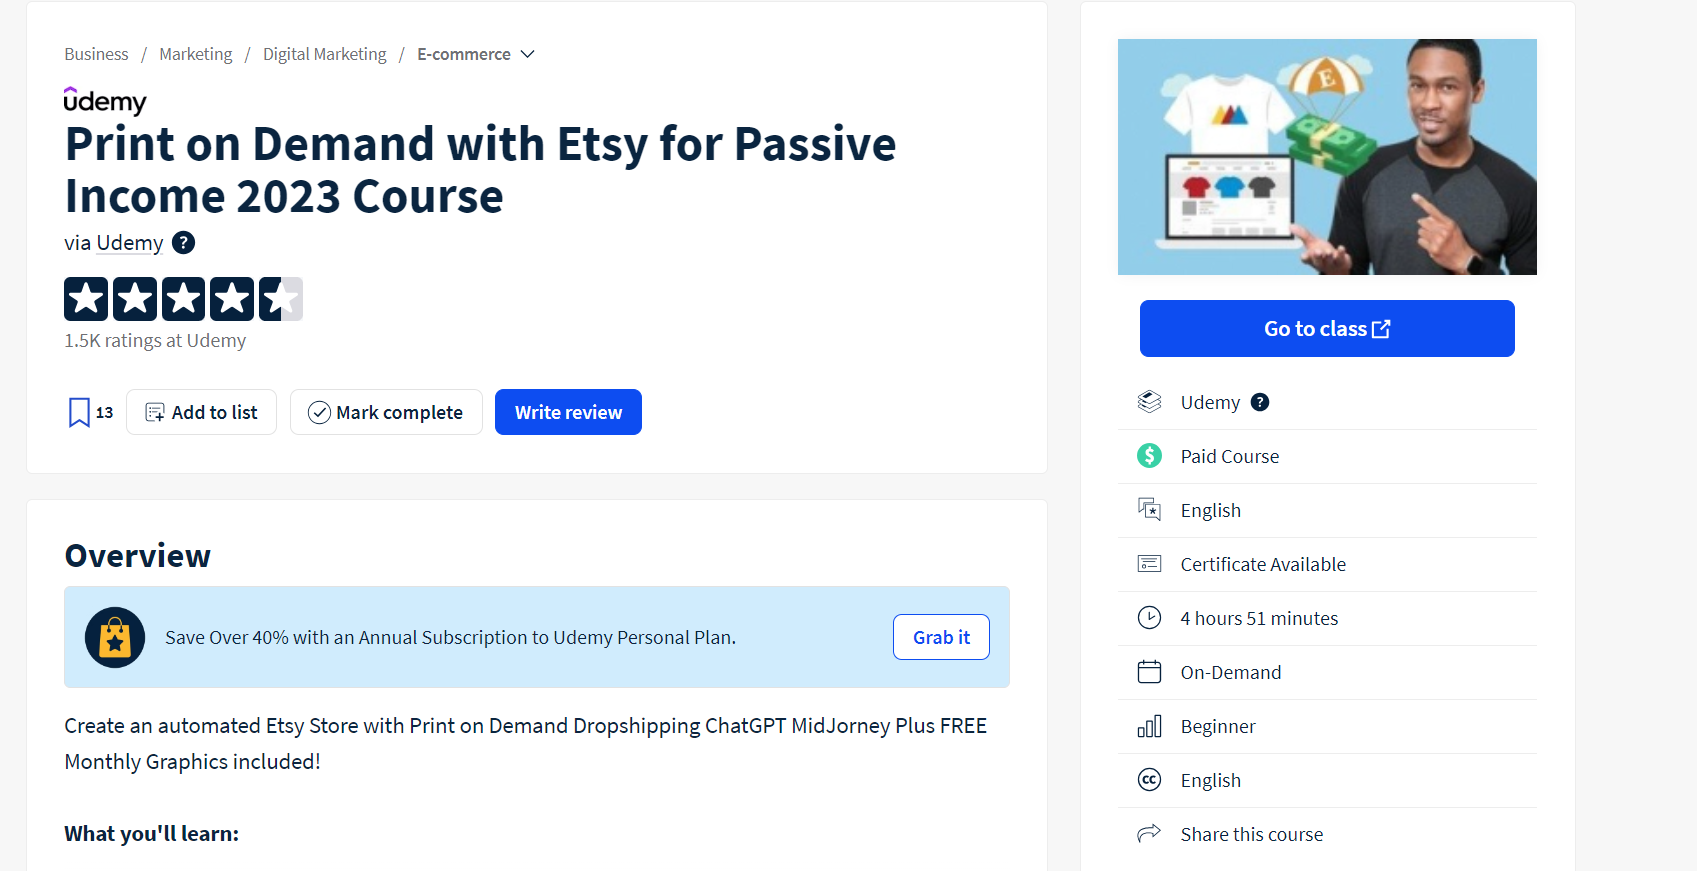 Print on Demand with Etsy for Passive Income